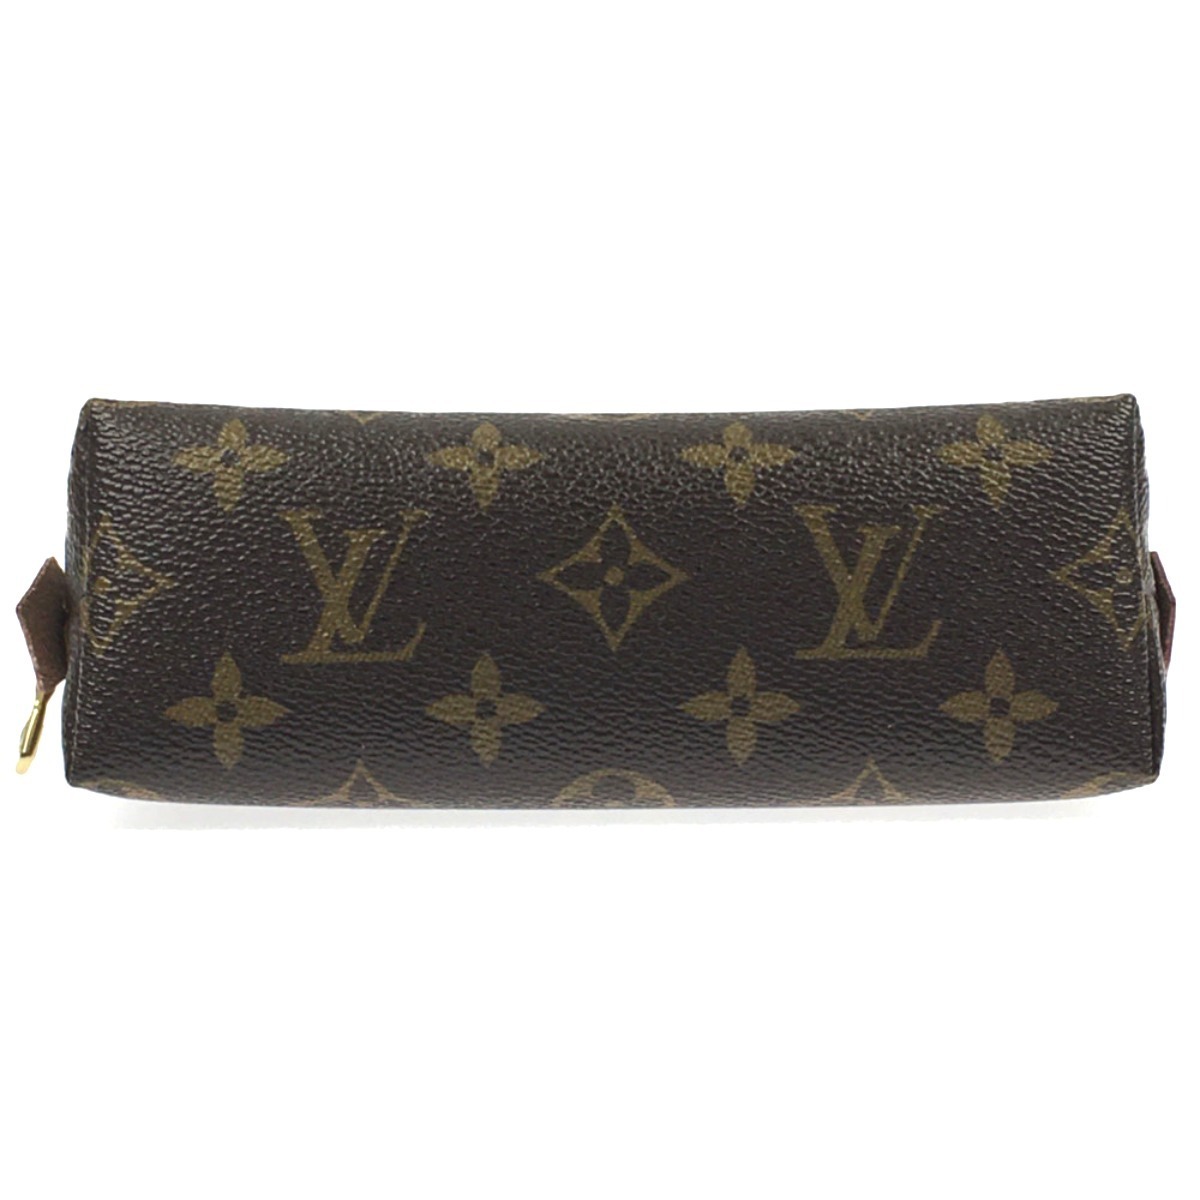 ▽▽ LOUIS VUITTON ルイヴィトン モノグラム ポシェット